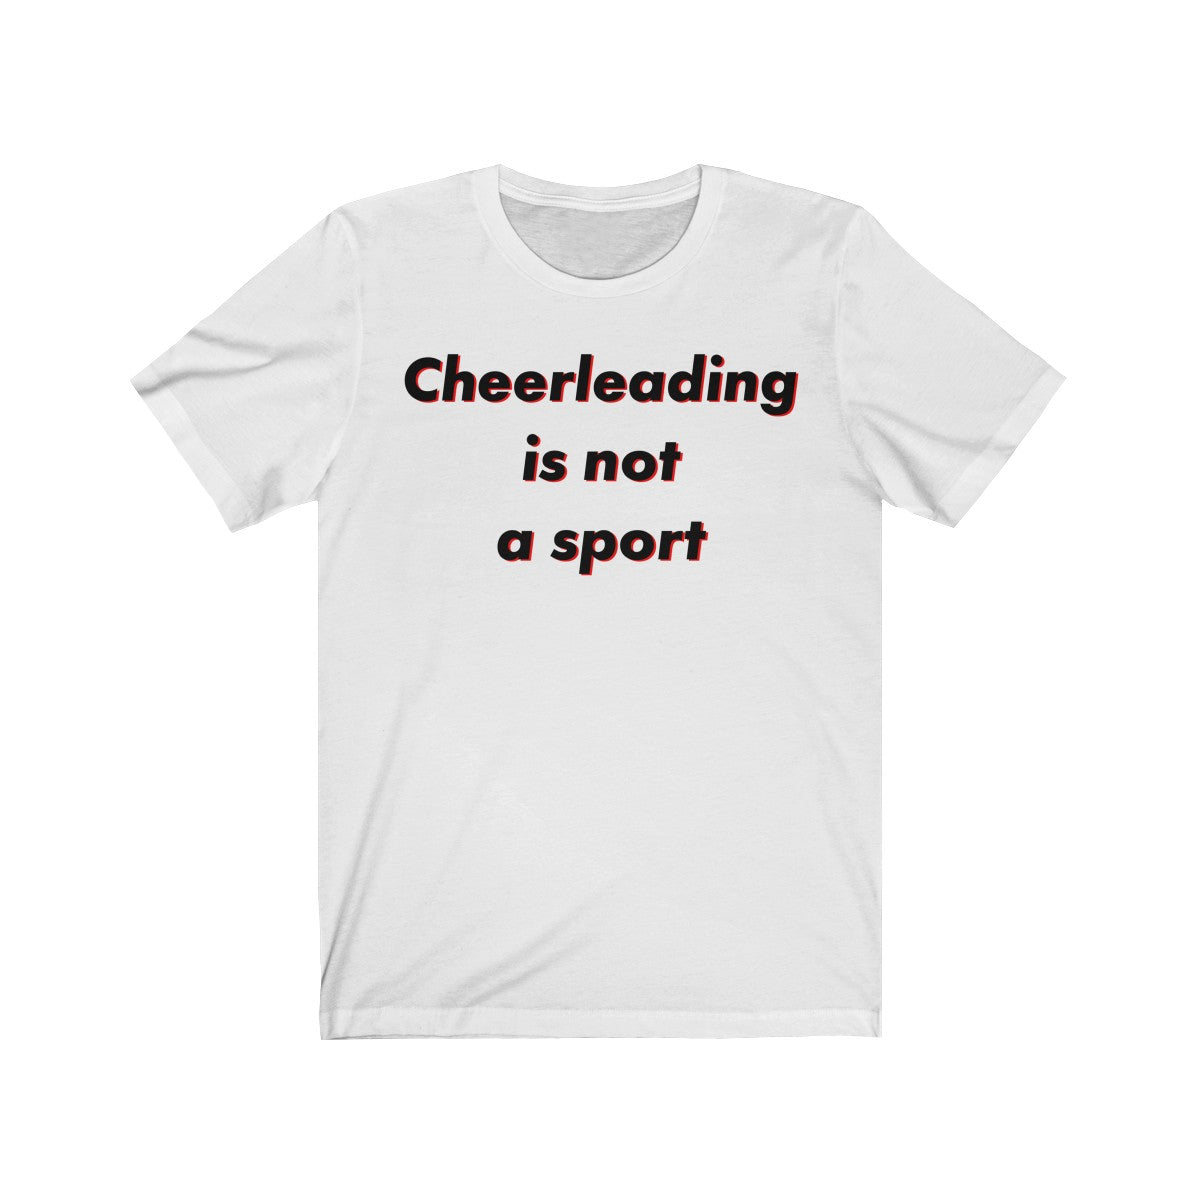 "Cheerleading is not a sport" - White/Black